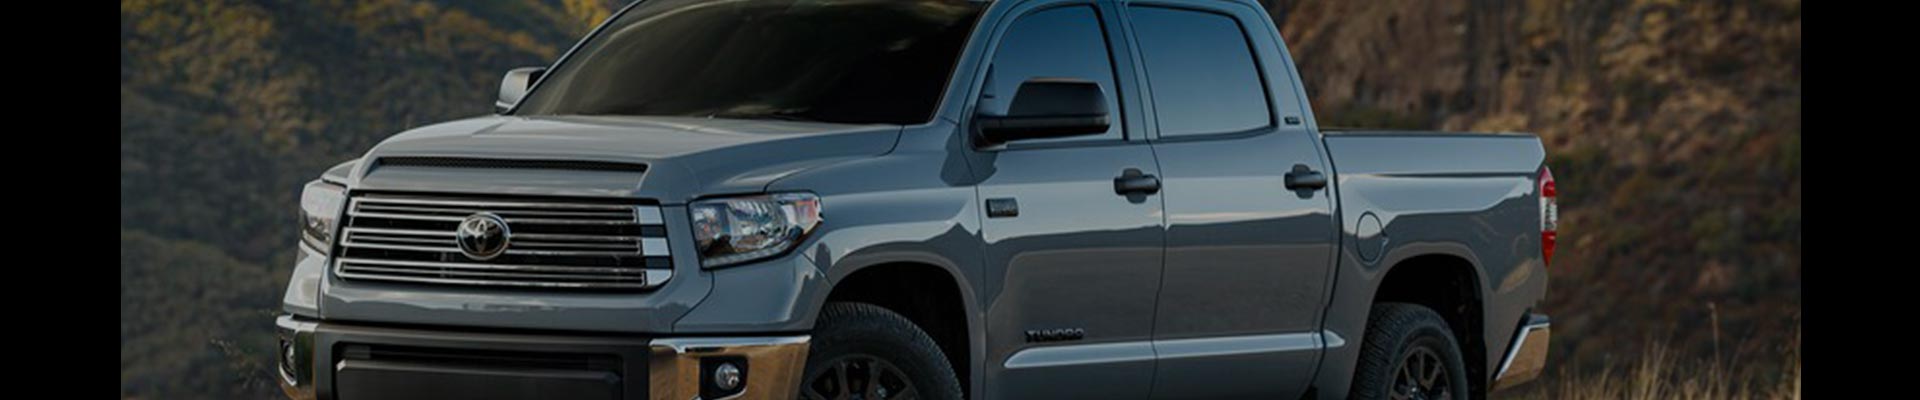 Shop Replacement and OEM 2003 Toyota Tundra Parts with Discounted Price on the Net